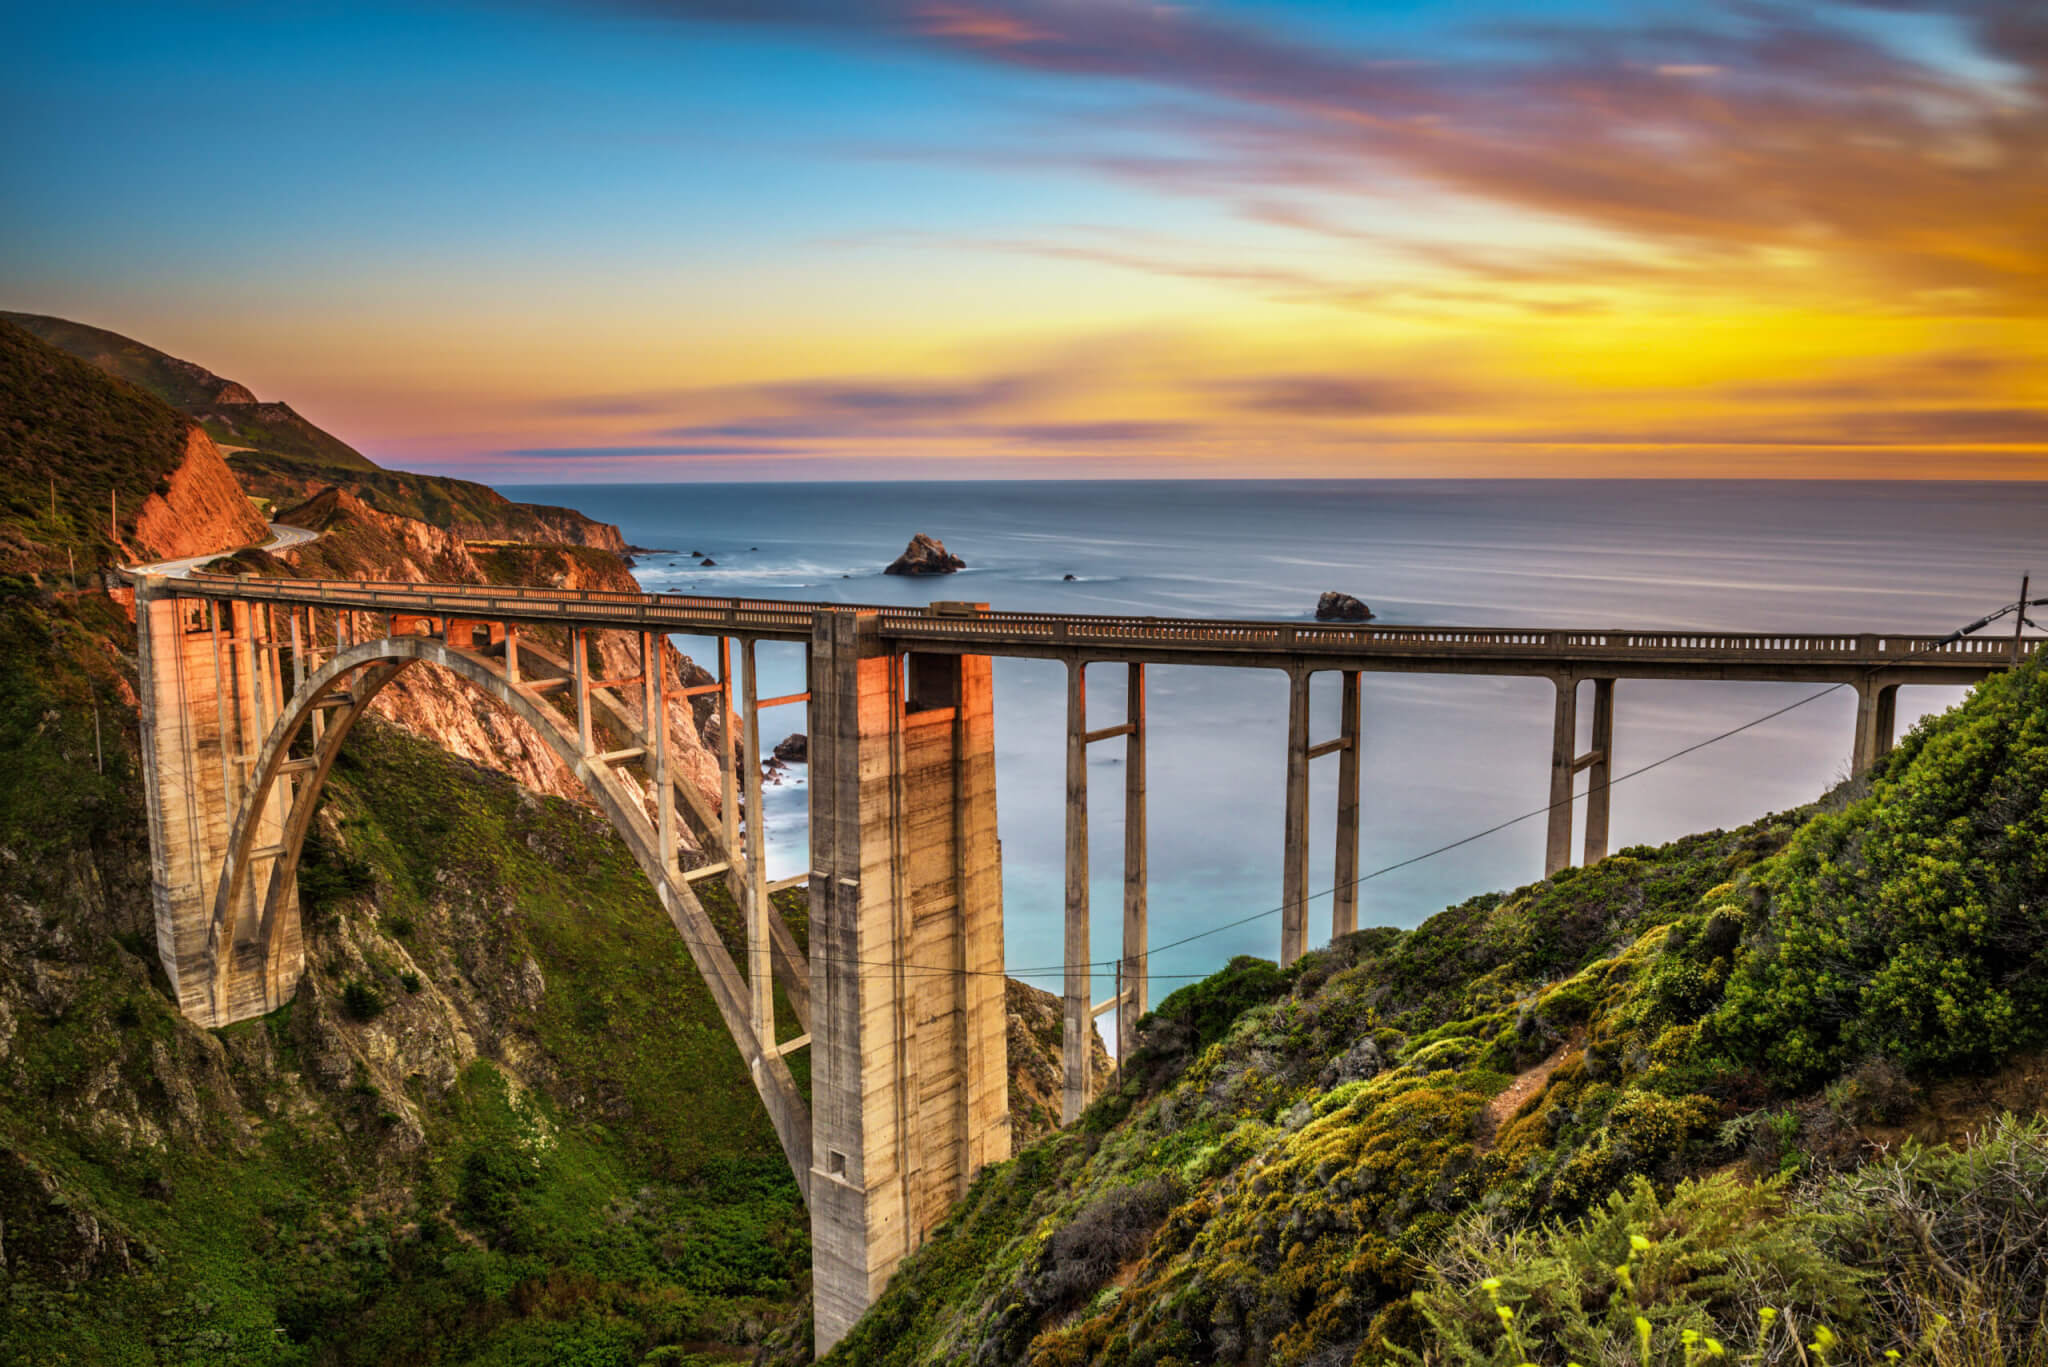 Bixby Bridge and Pacific Coast Highway at sunset